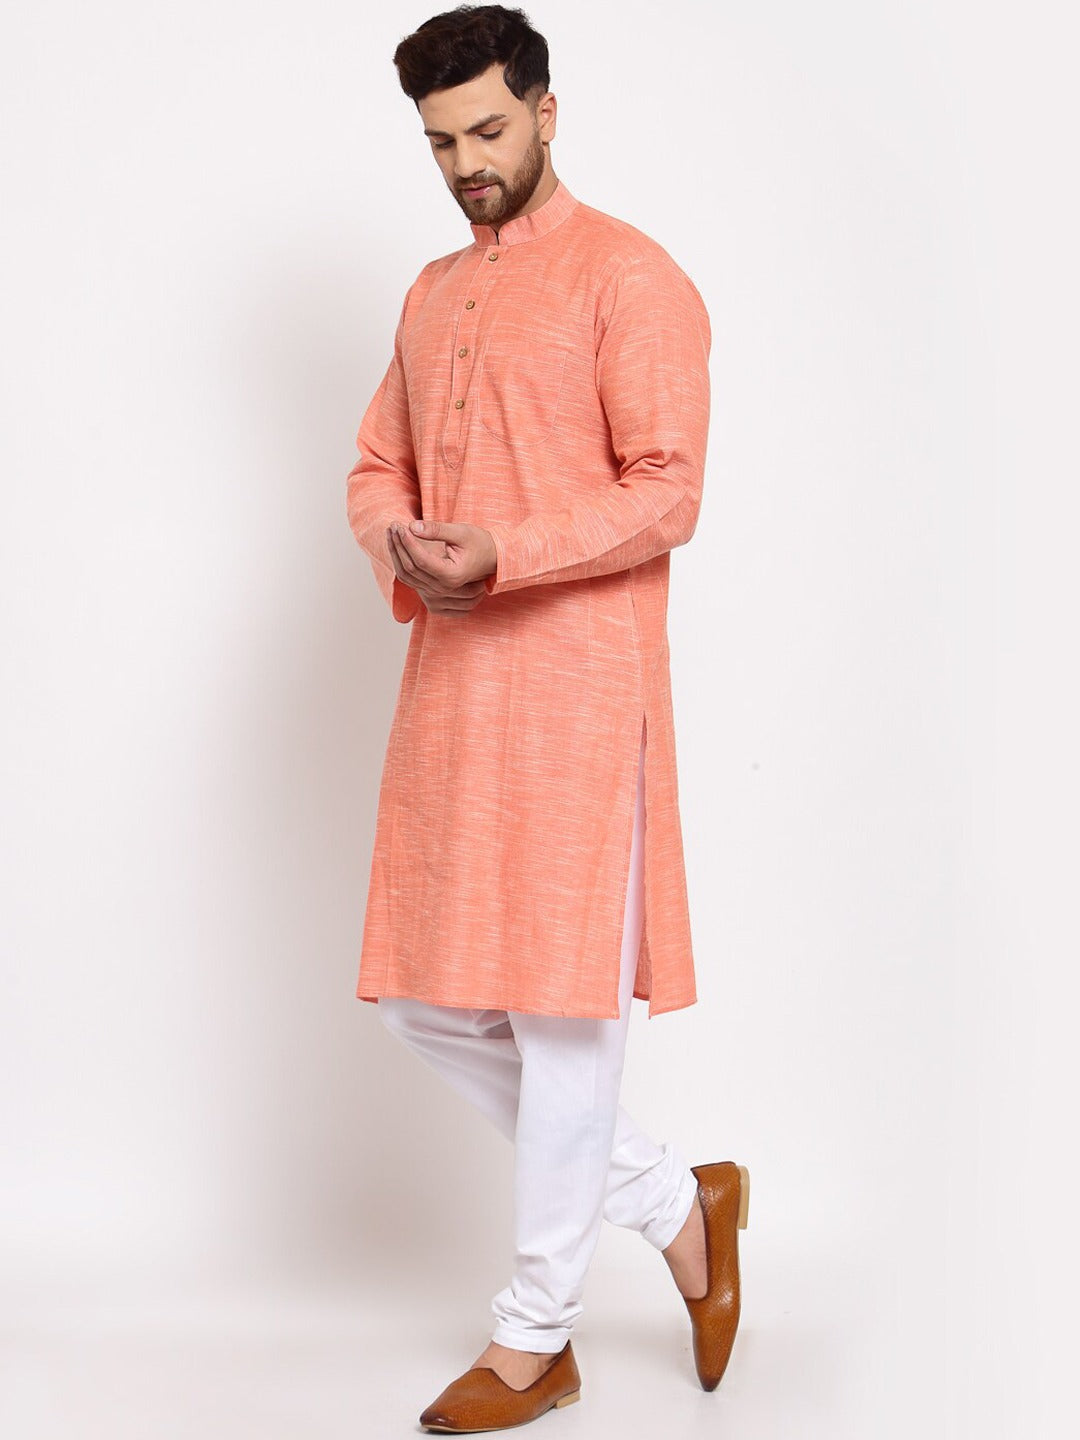 Orange Solid Cotton Kurta Indian Clothing in Denver, CO, Aurora, CO, Boulder, CO, Fort Collins, CO, Colorado Springs, CO, Parker, CO, Highlands Ranch, CO, Cherry Creek, CO, Centennial, CO, and Longmont, CO. NATIONWIDE SHIPPING USA- India Fashion X